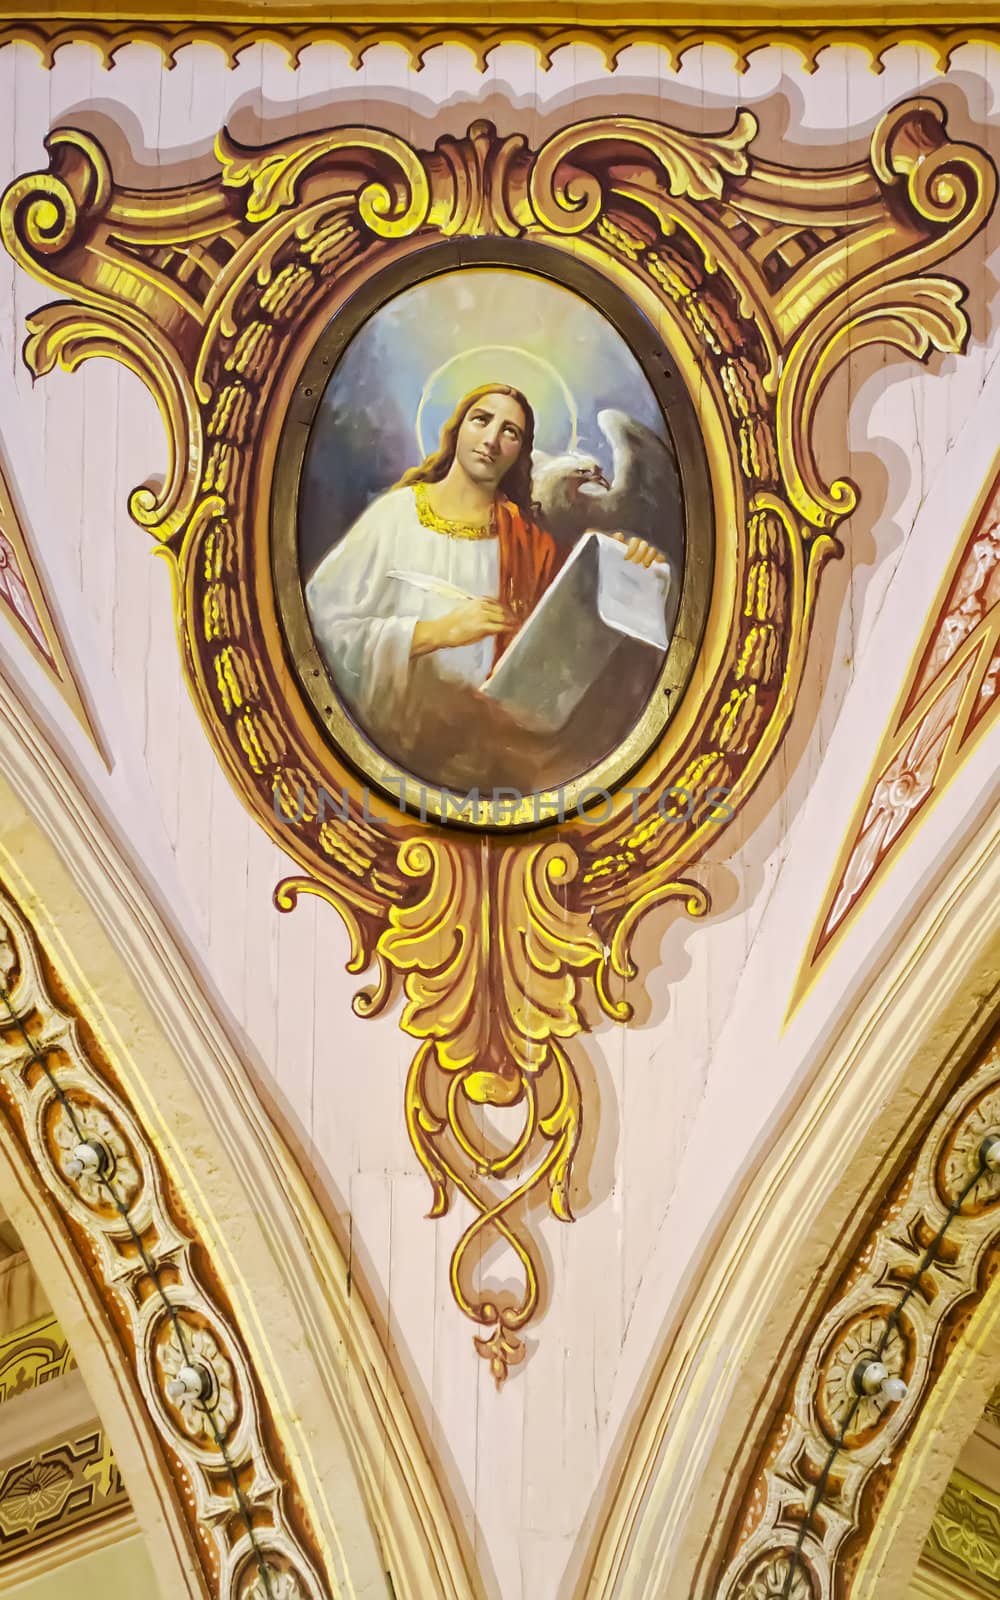 St. John, the Gospel writer, is depicted in a 400-year old painting in the church of Betis, Pampanga.  A church dubbed as the Sistine Chapel of the Philippines because of its intricate ceiling painting.